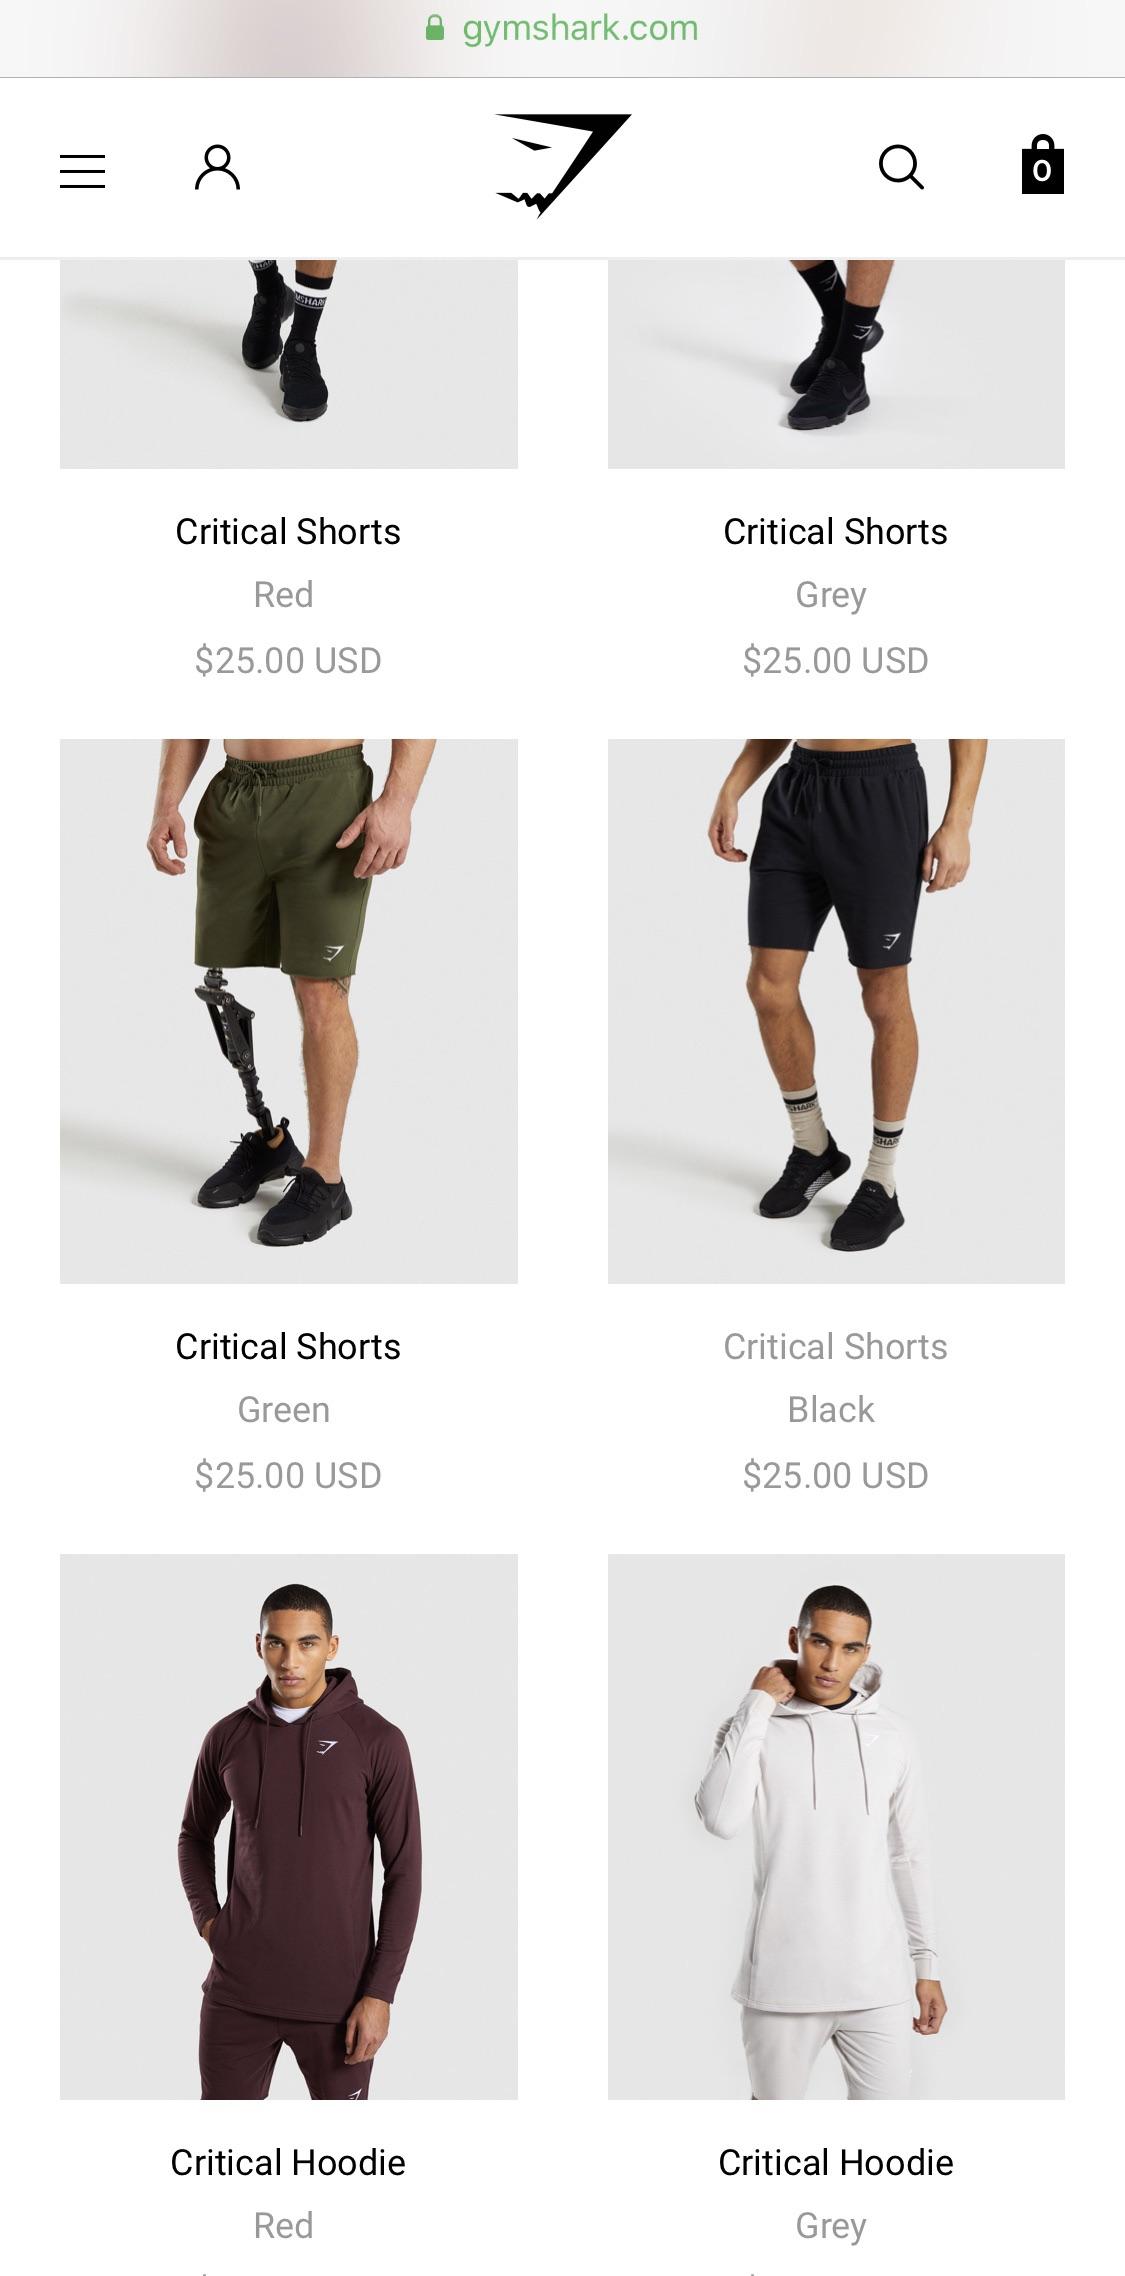 Props to Gymshark for using an amputee as a product model